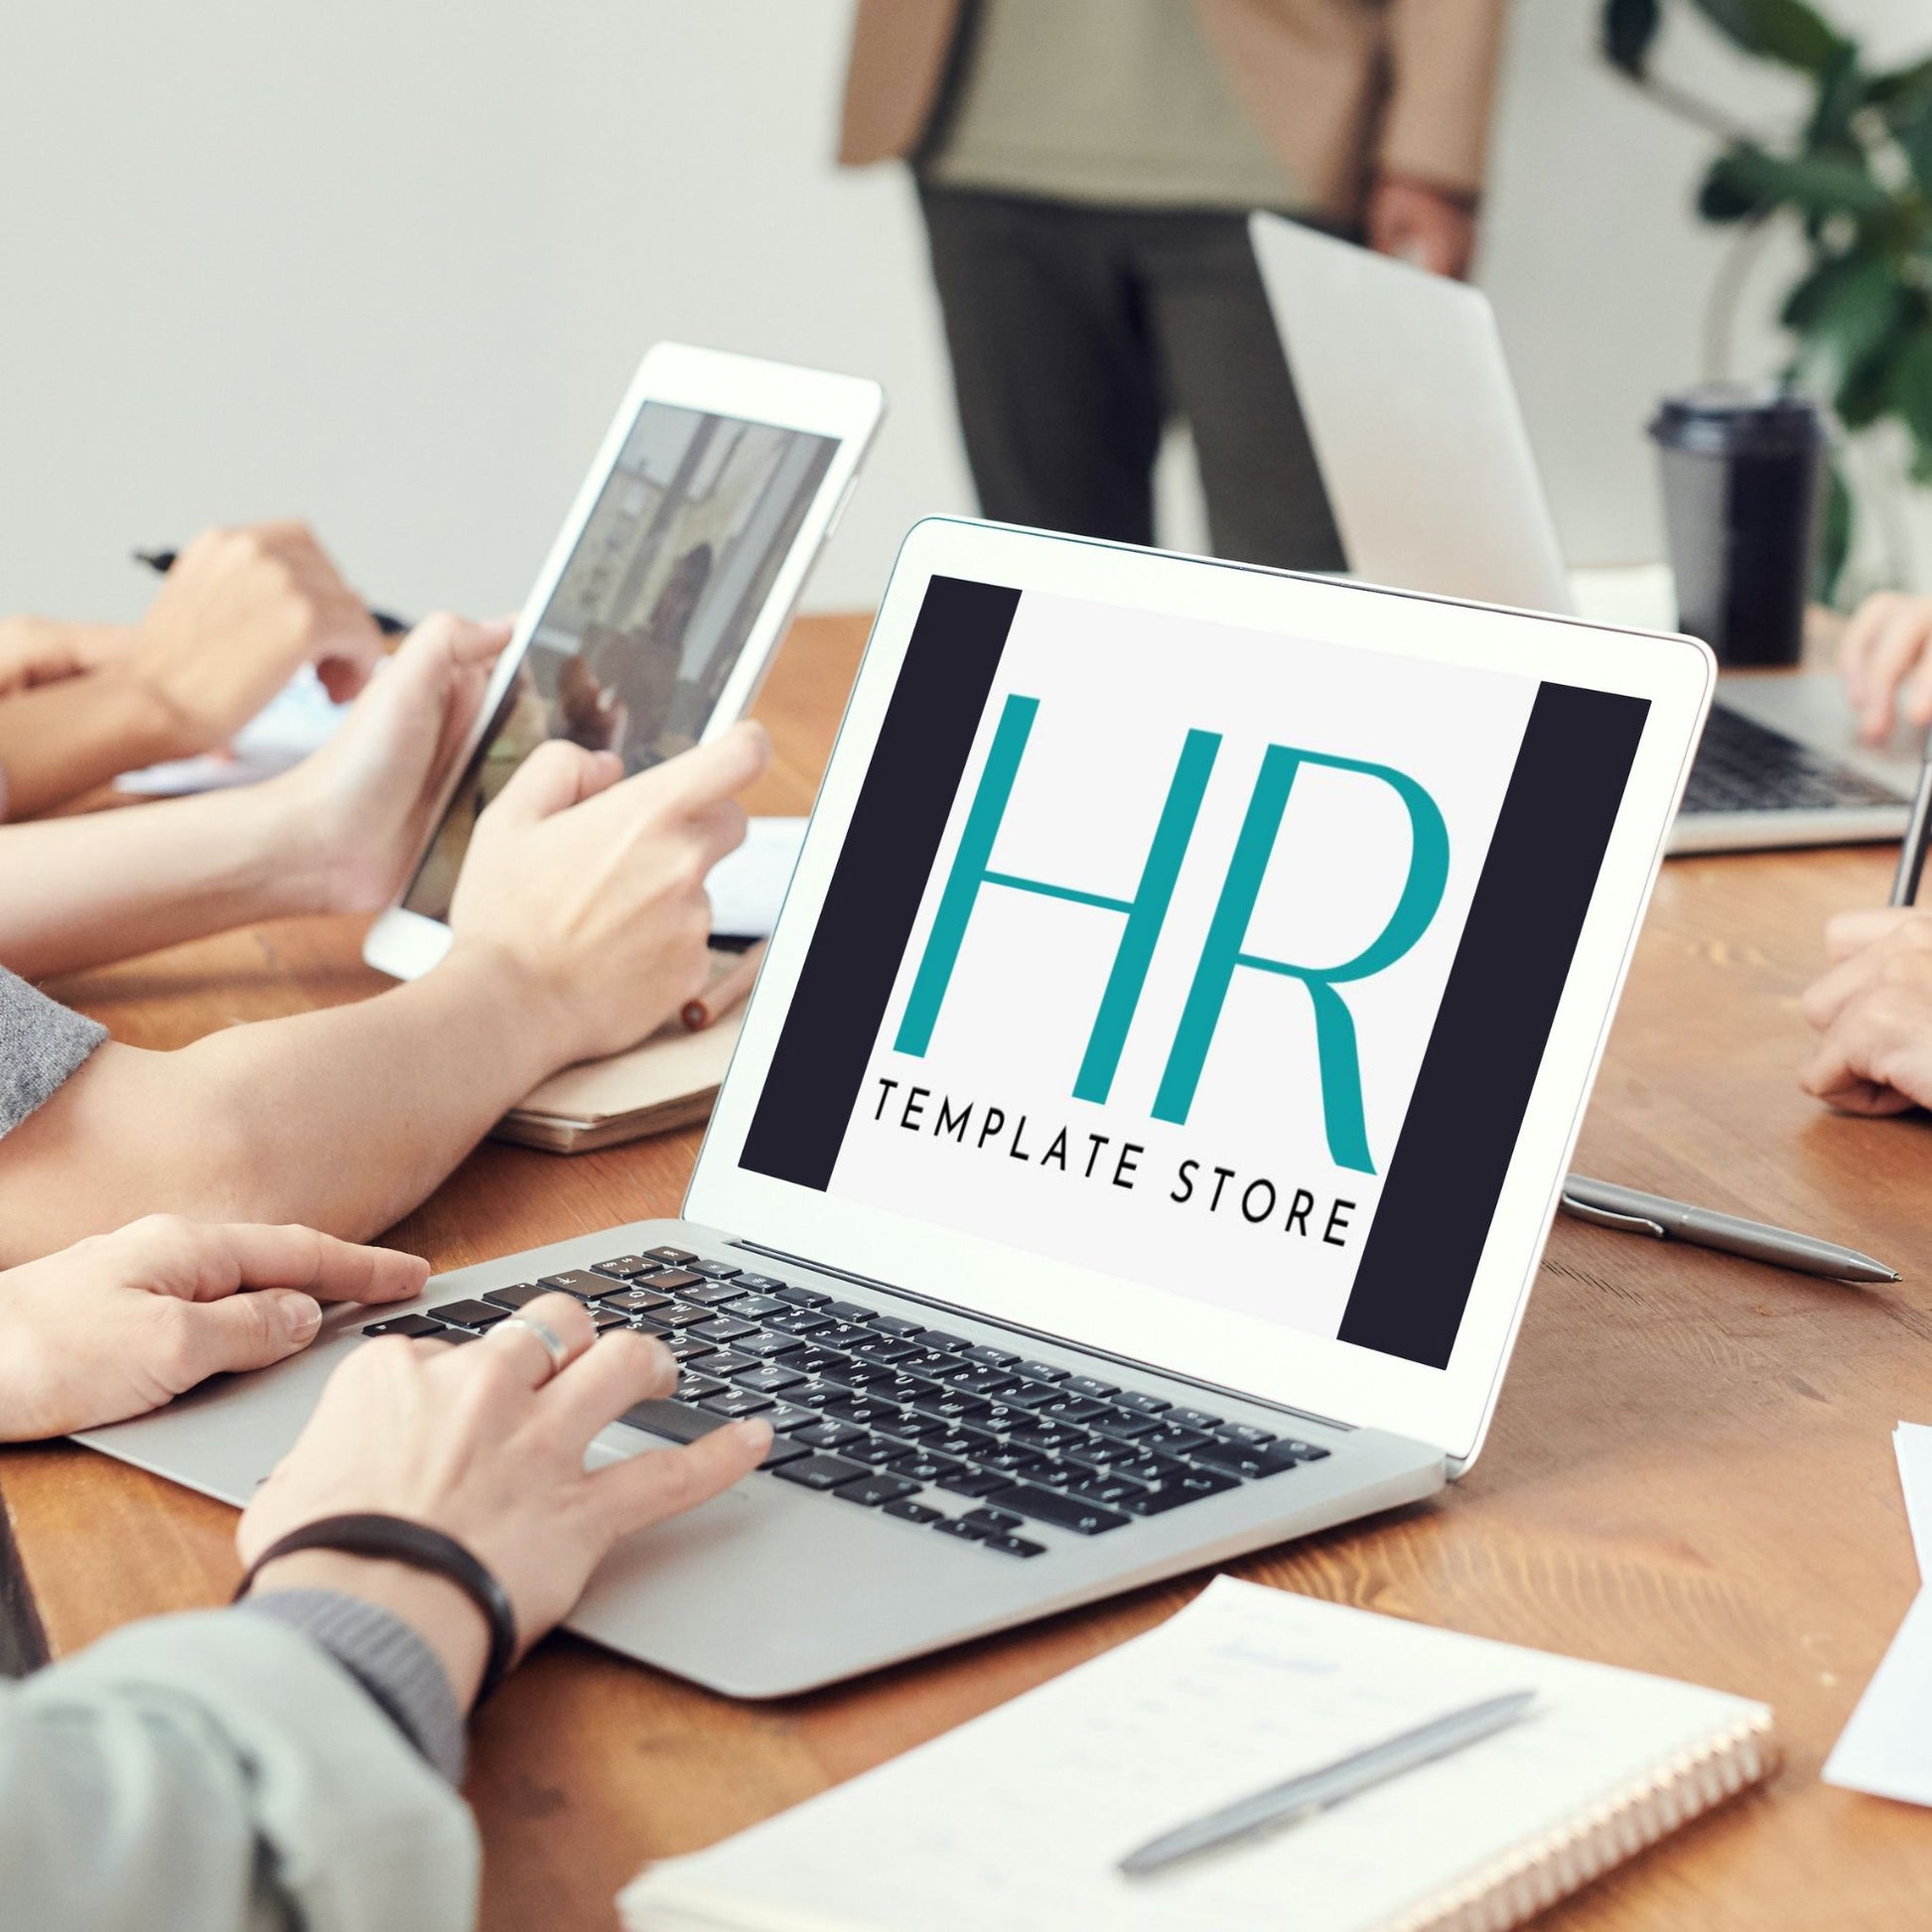 The HR Template store logo appears on a laptop with employees around a conference table.